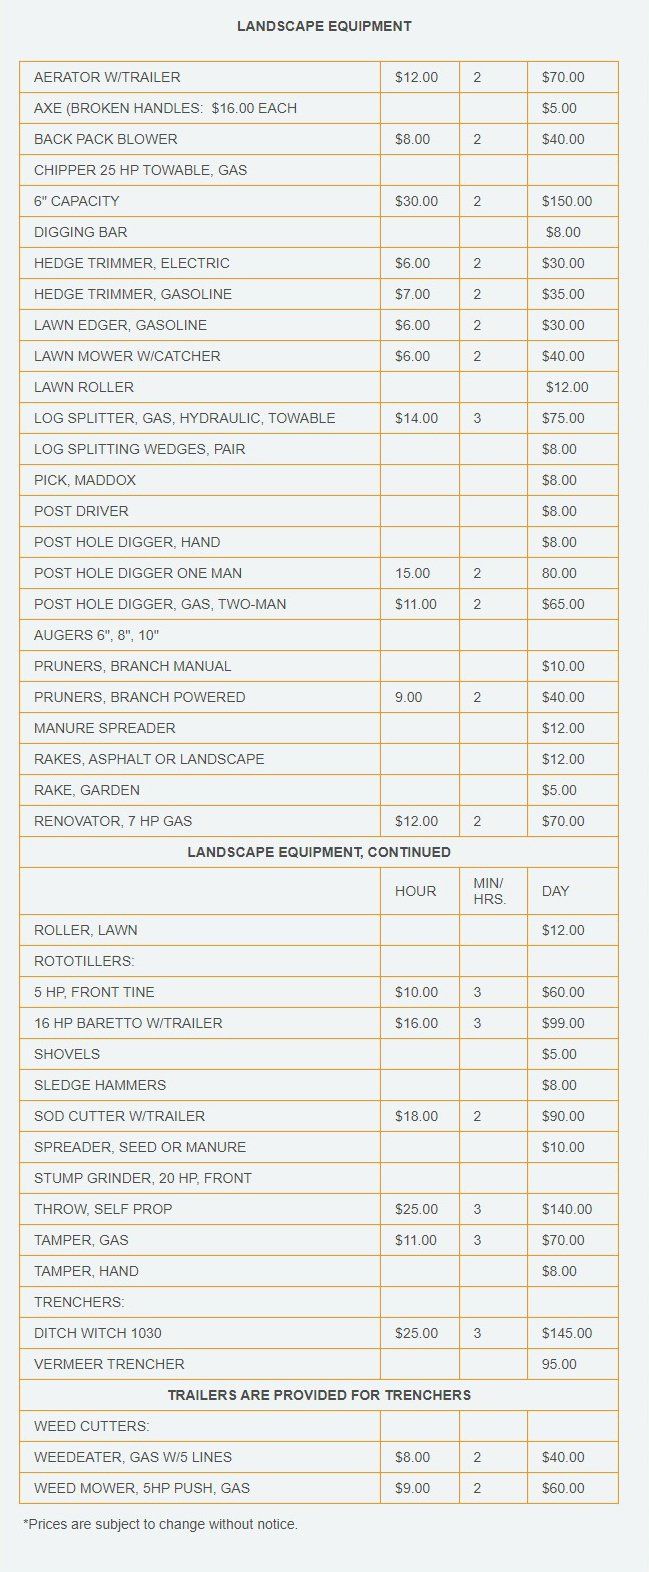 Landscape Equipment pricing table